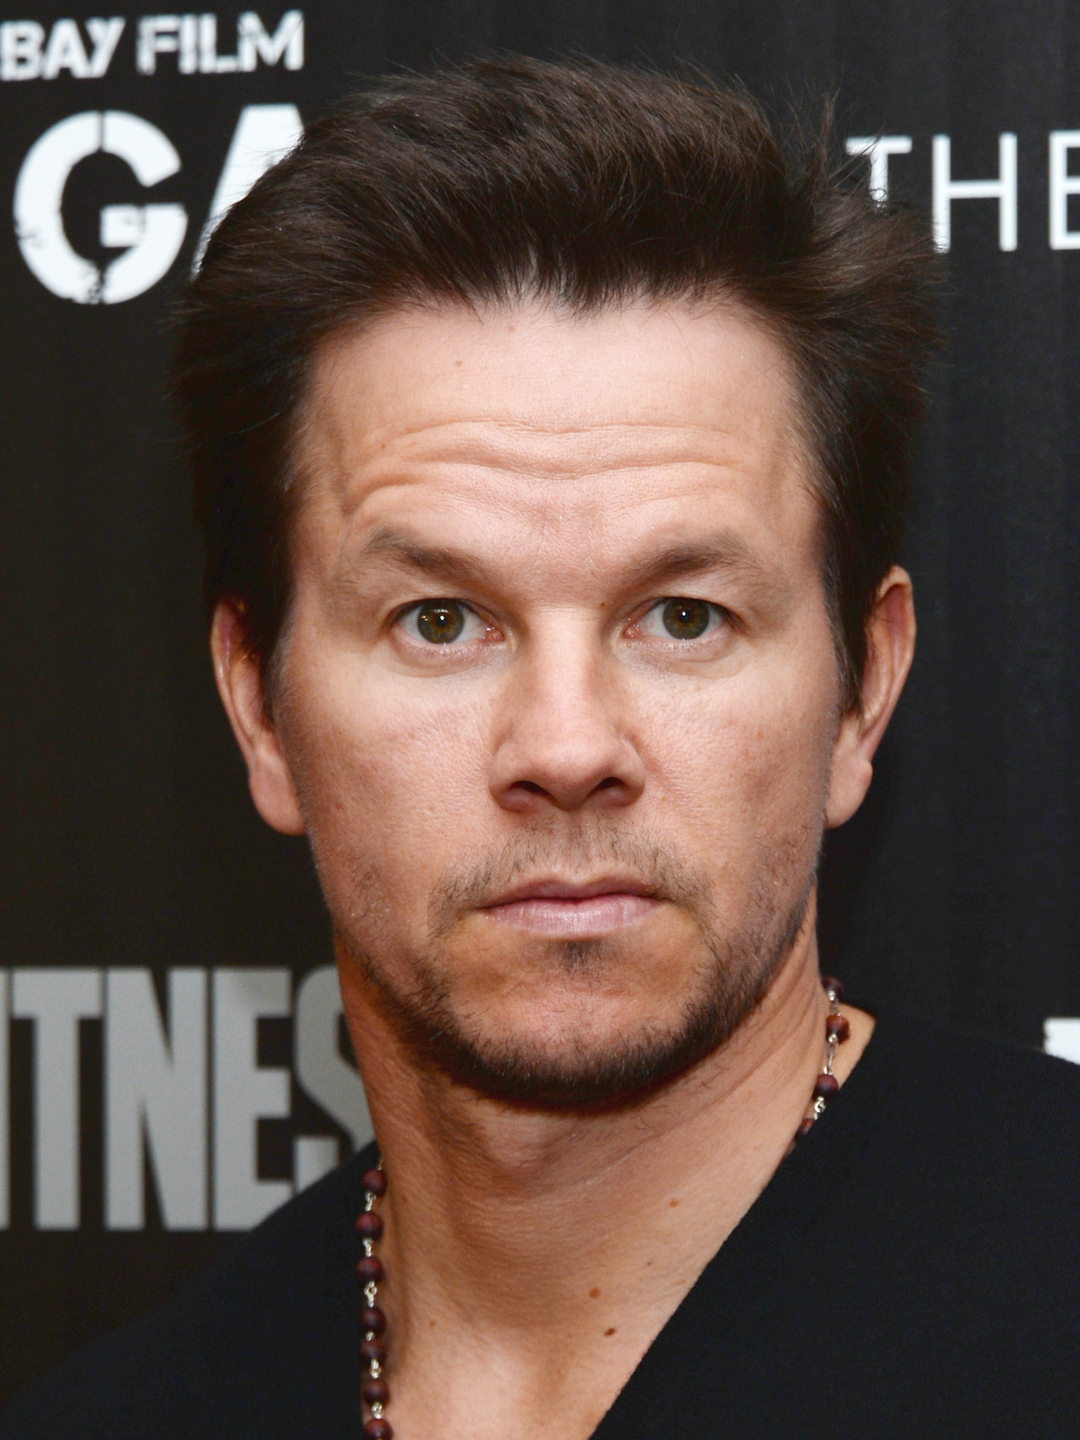 Mark Wahlberg who is his mother